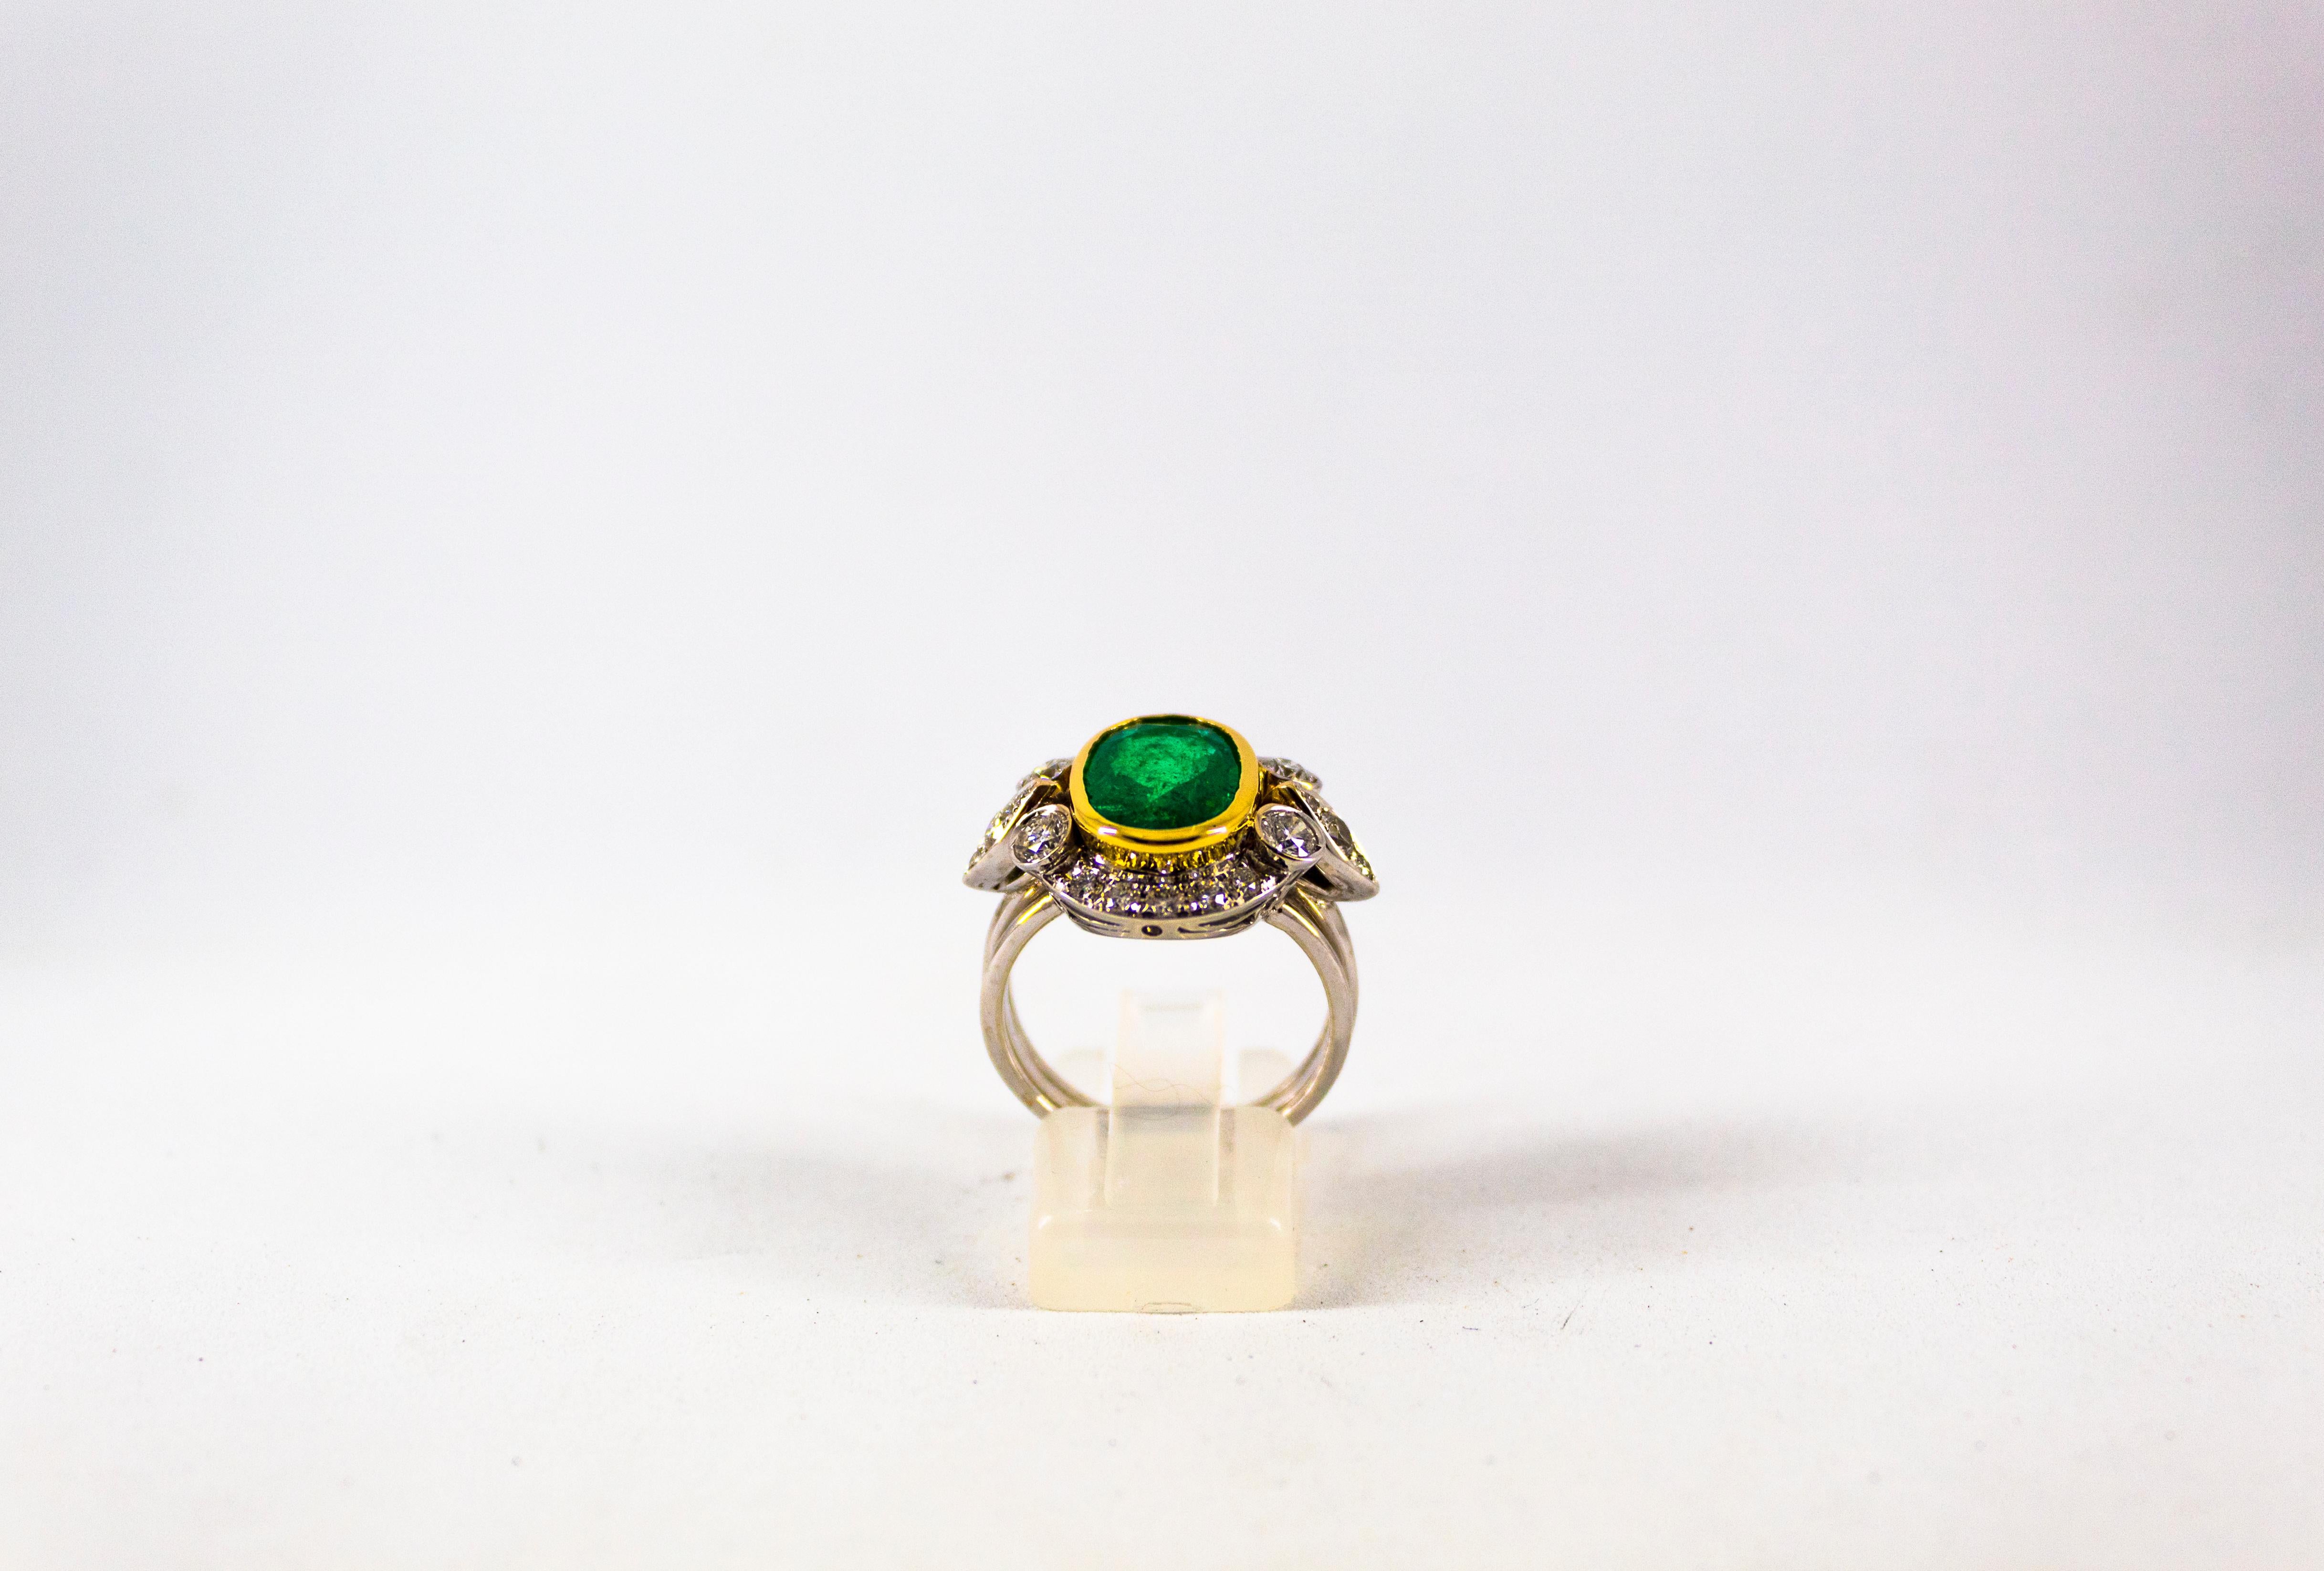 This Ring is made of 18K White Gold.
This Ring has 1.10 Carats of White Diamonds.
This Ring has a 3.48 Carats Colombia Emerald.
This Ring is inspired by Art Deco.
Size ITA: 17 USA: 8
We're a workshop so every piece is handmade, customizable and